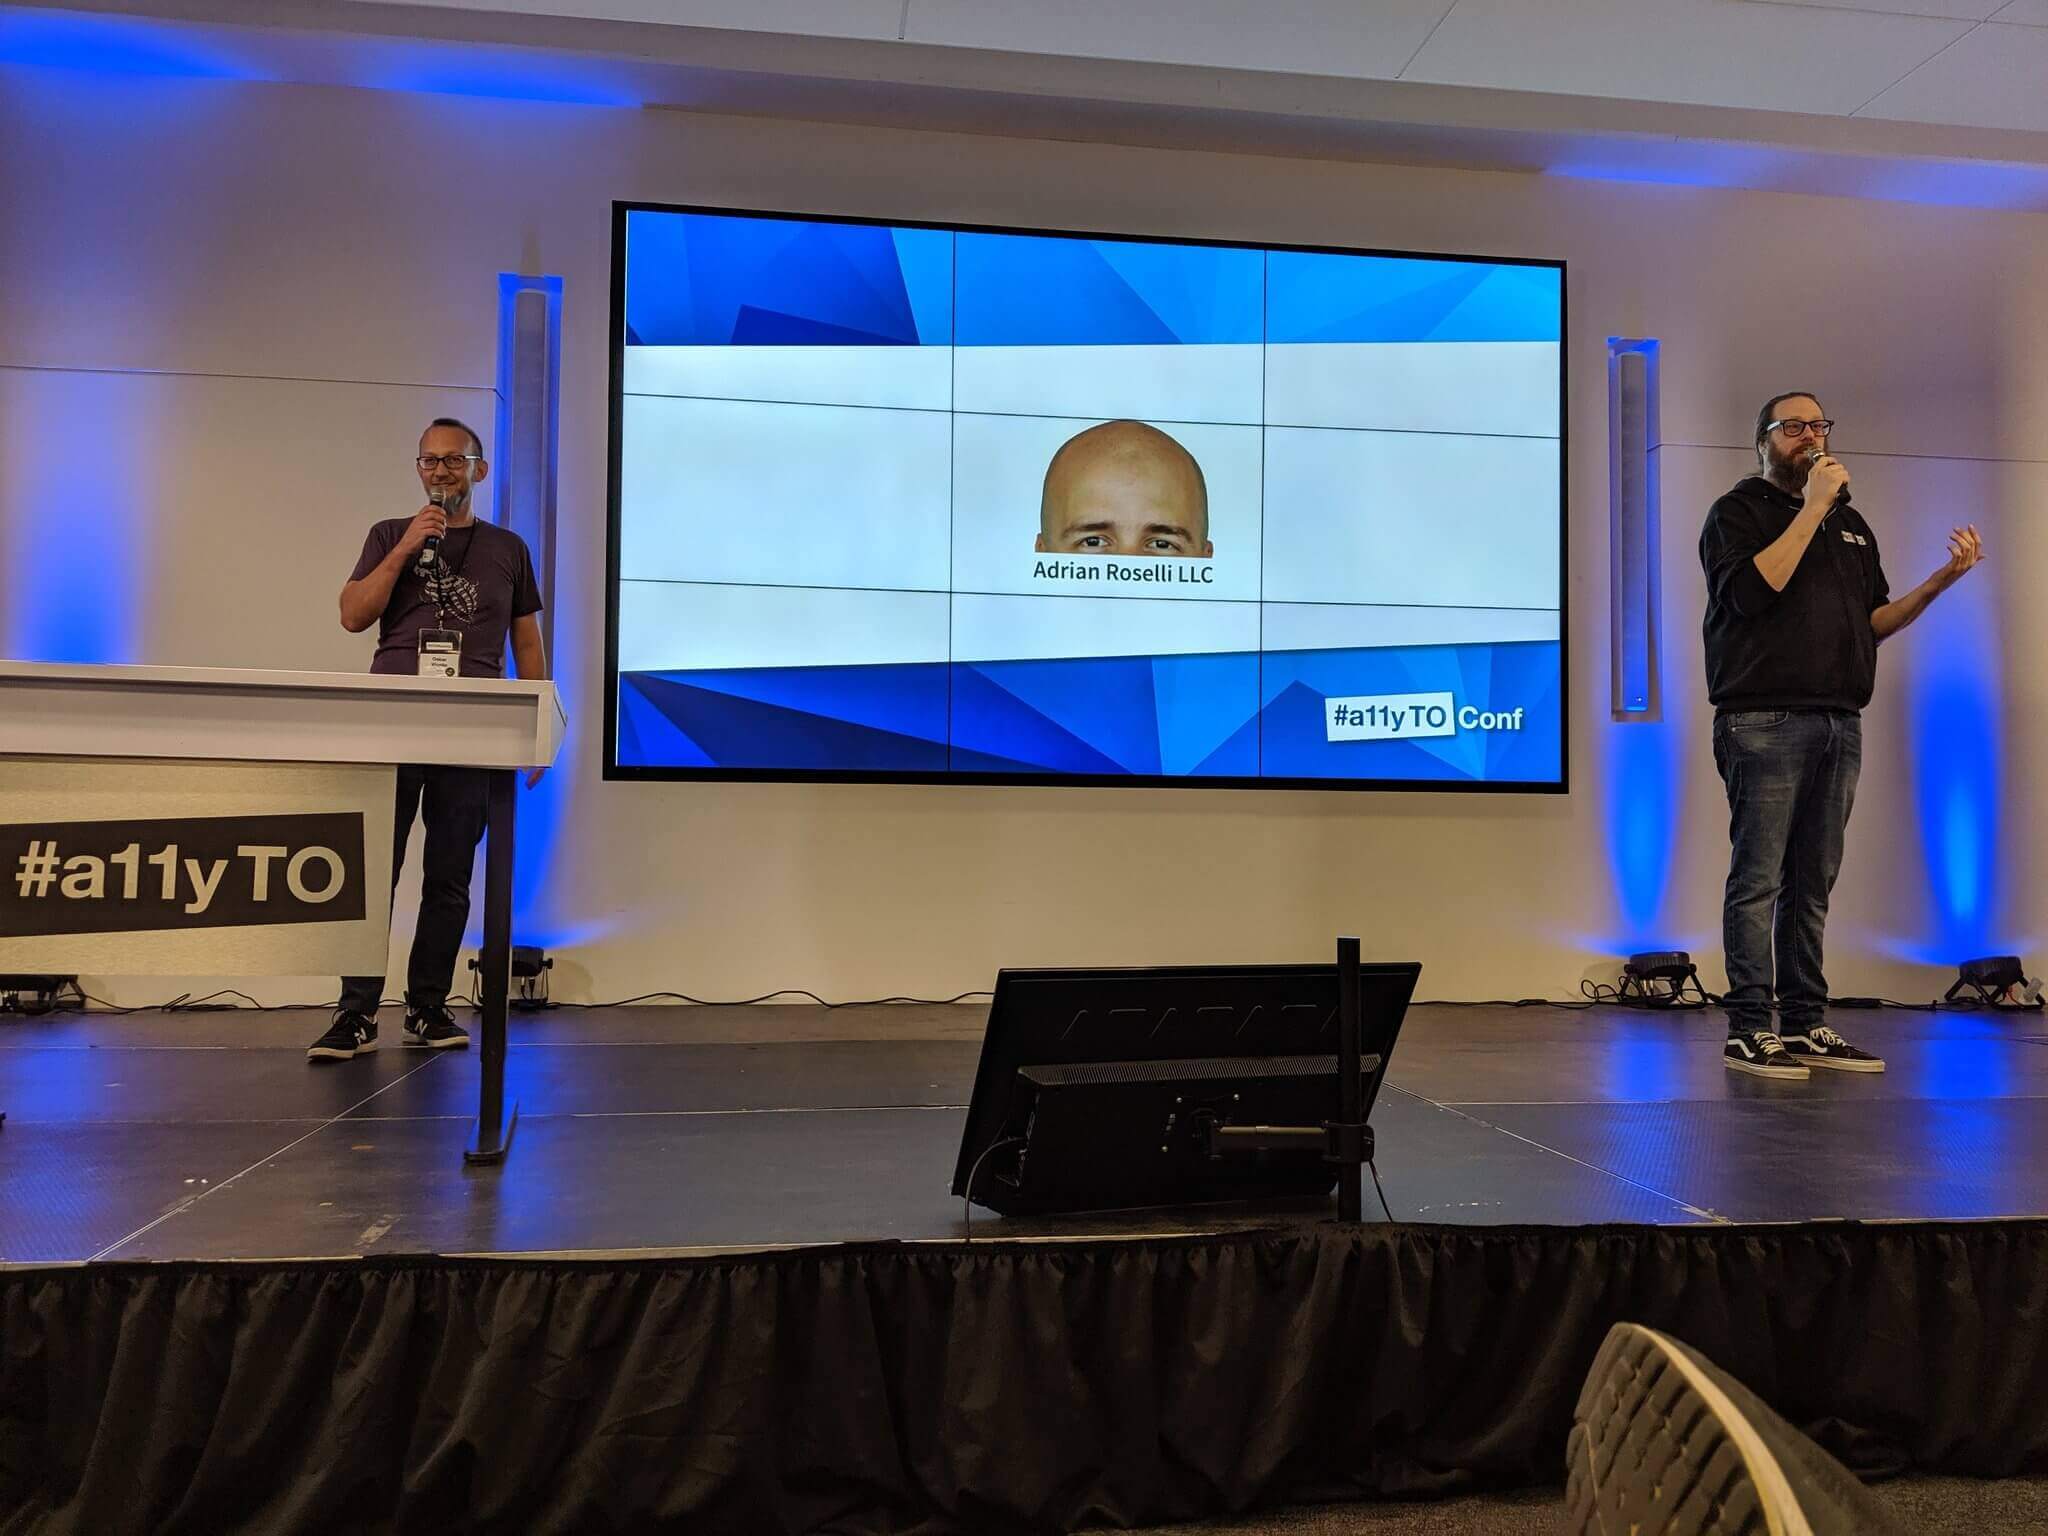 Oskar and Billy on stage in front of a large screen showing the top of my head as a sponsor.